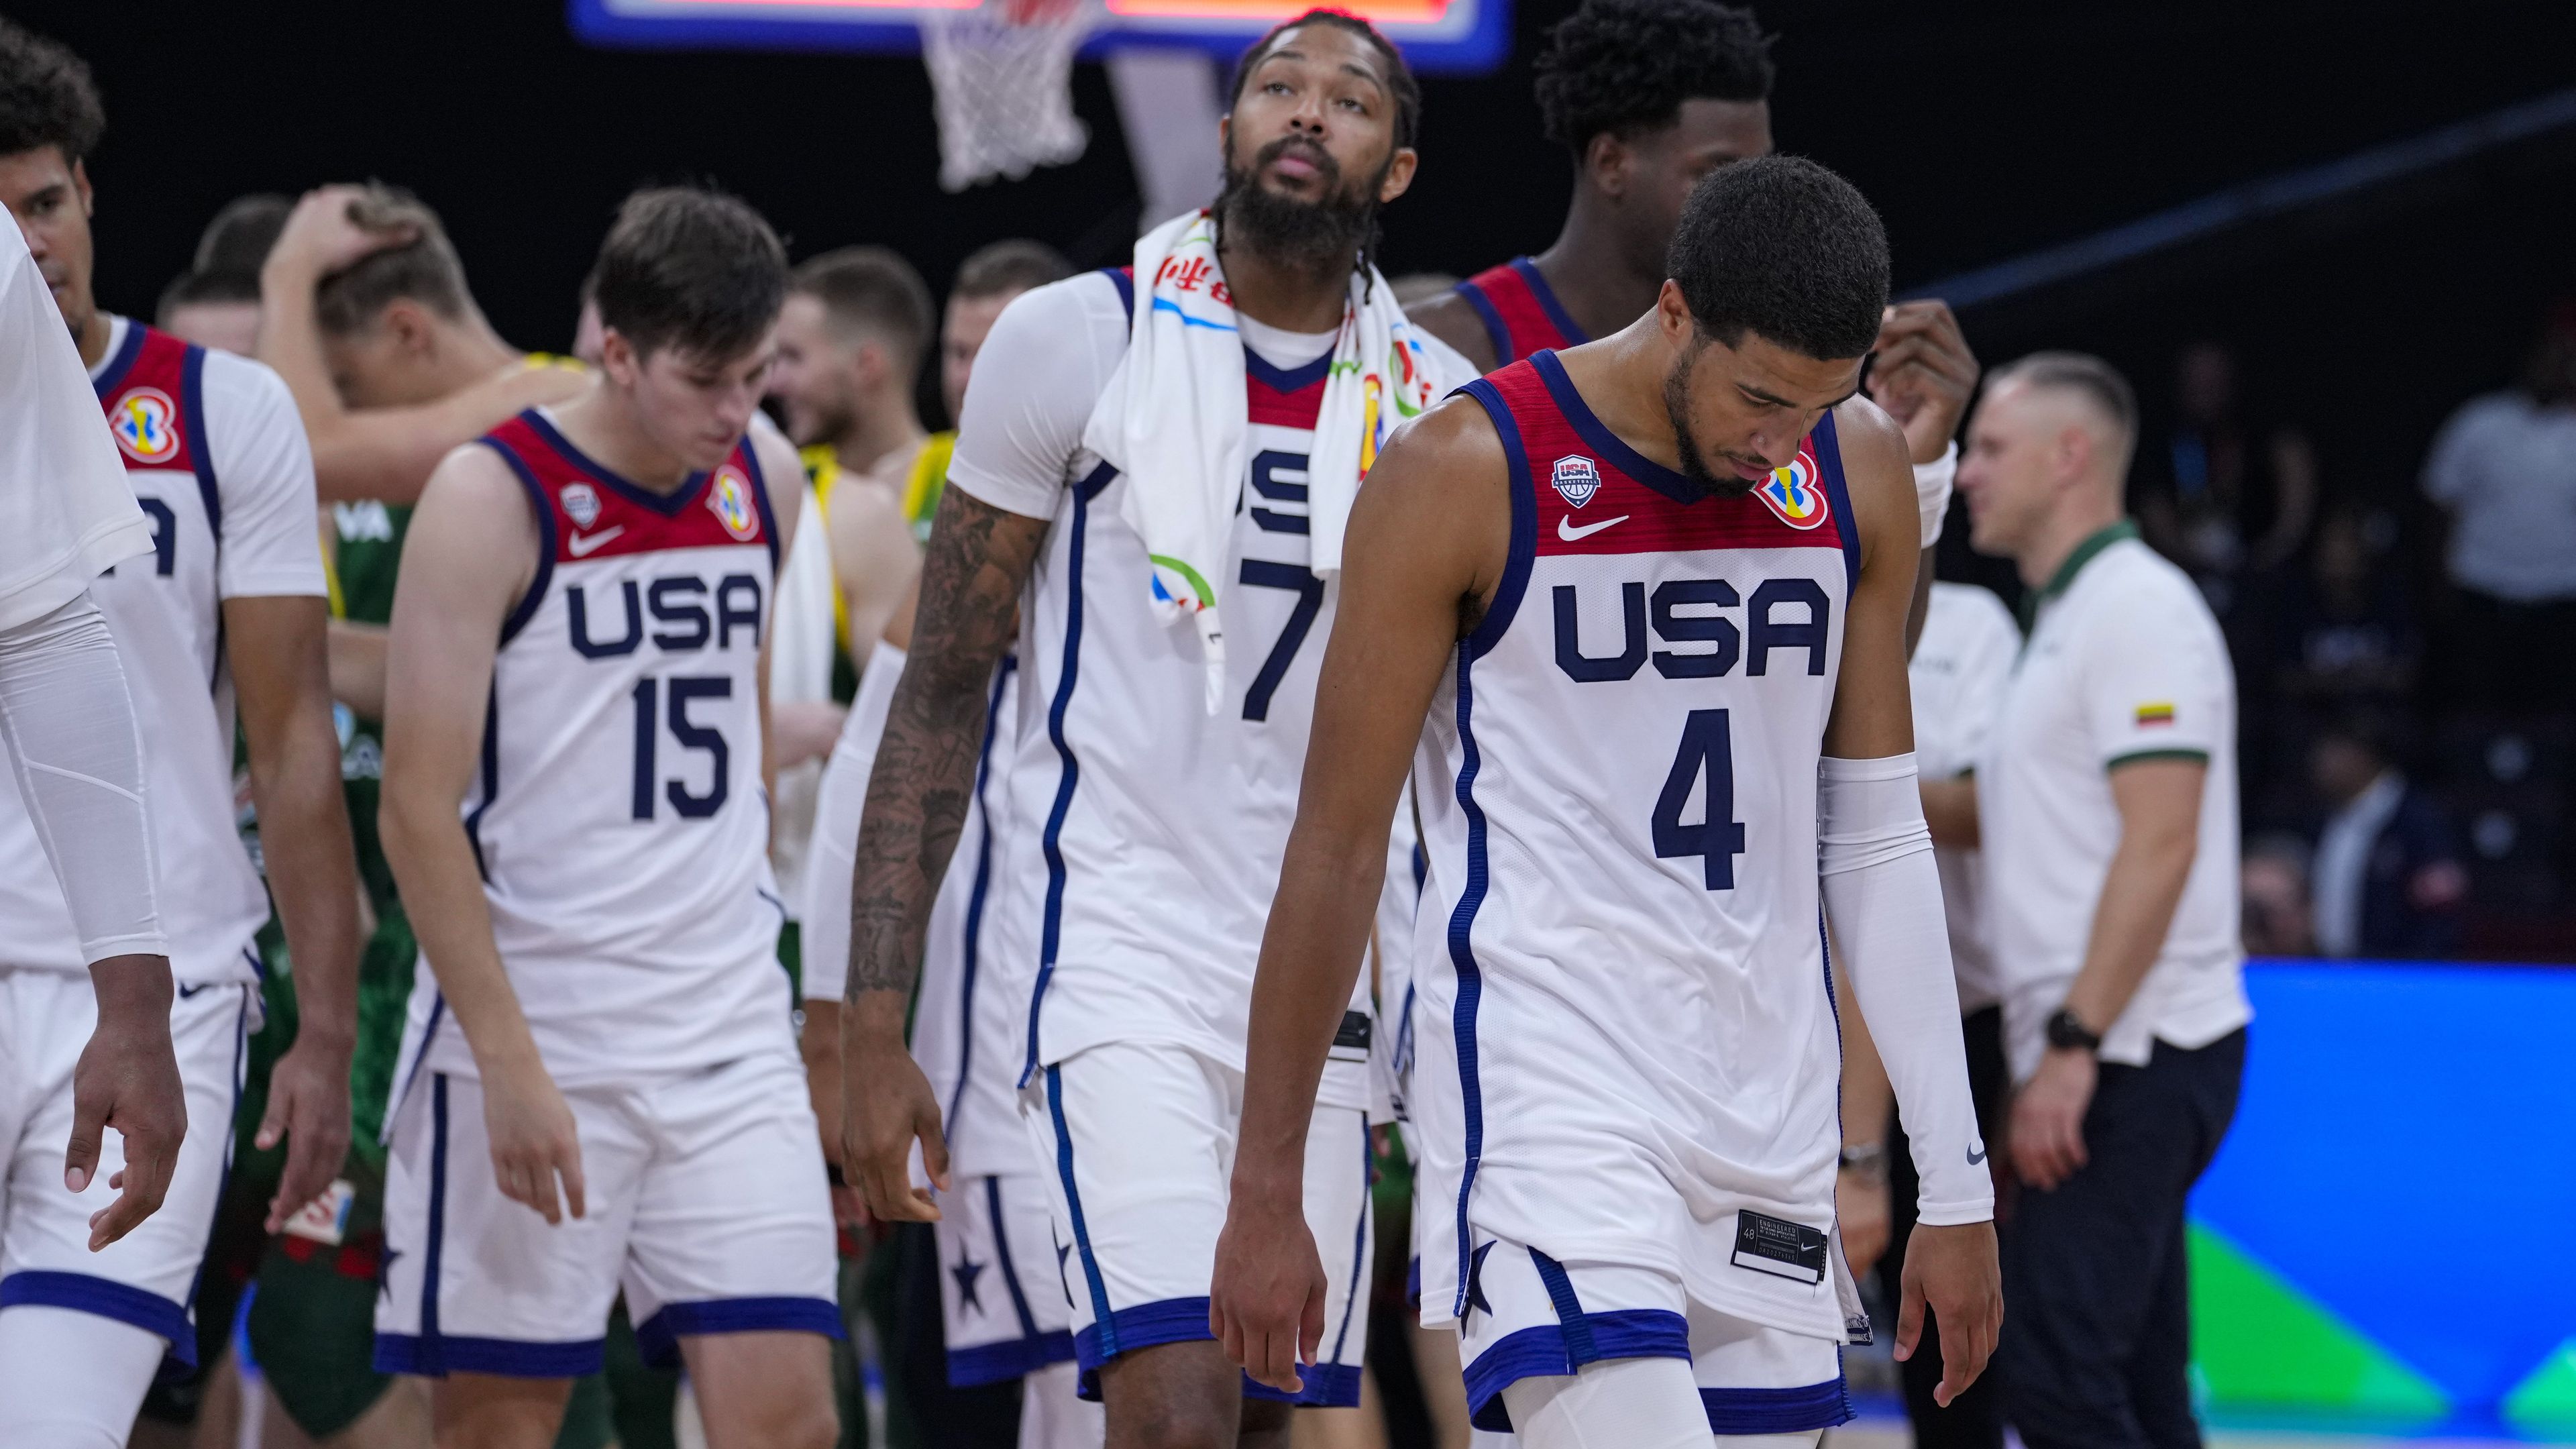 US guard Tyrese Haliburton leads the team off the court after a loss to Lithuania.